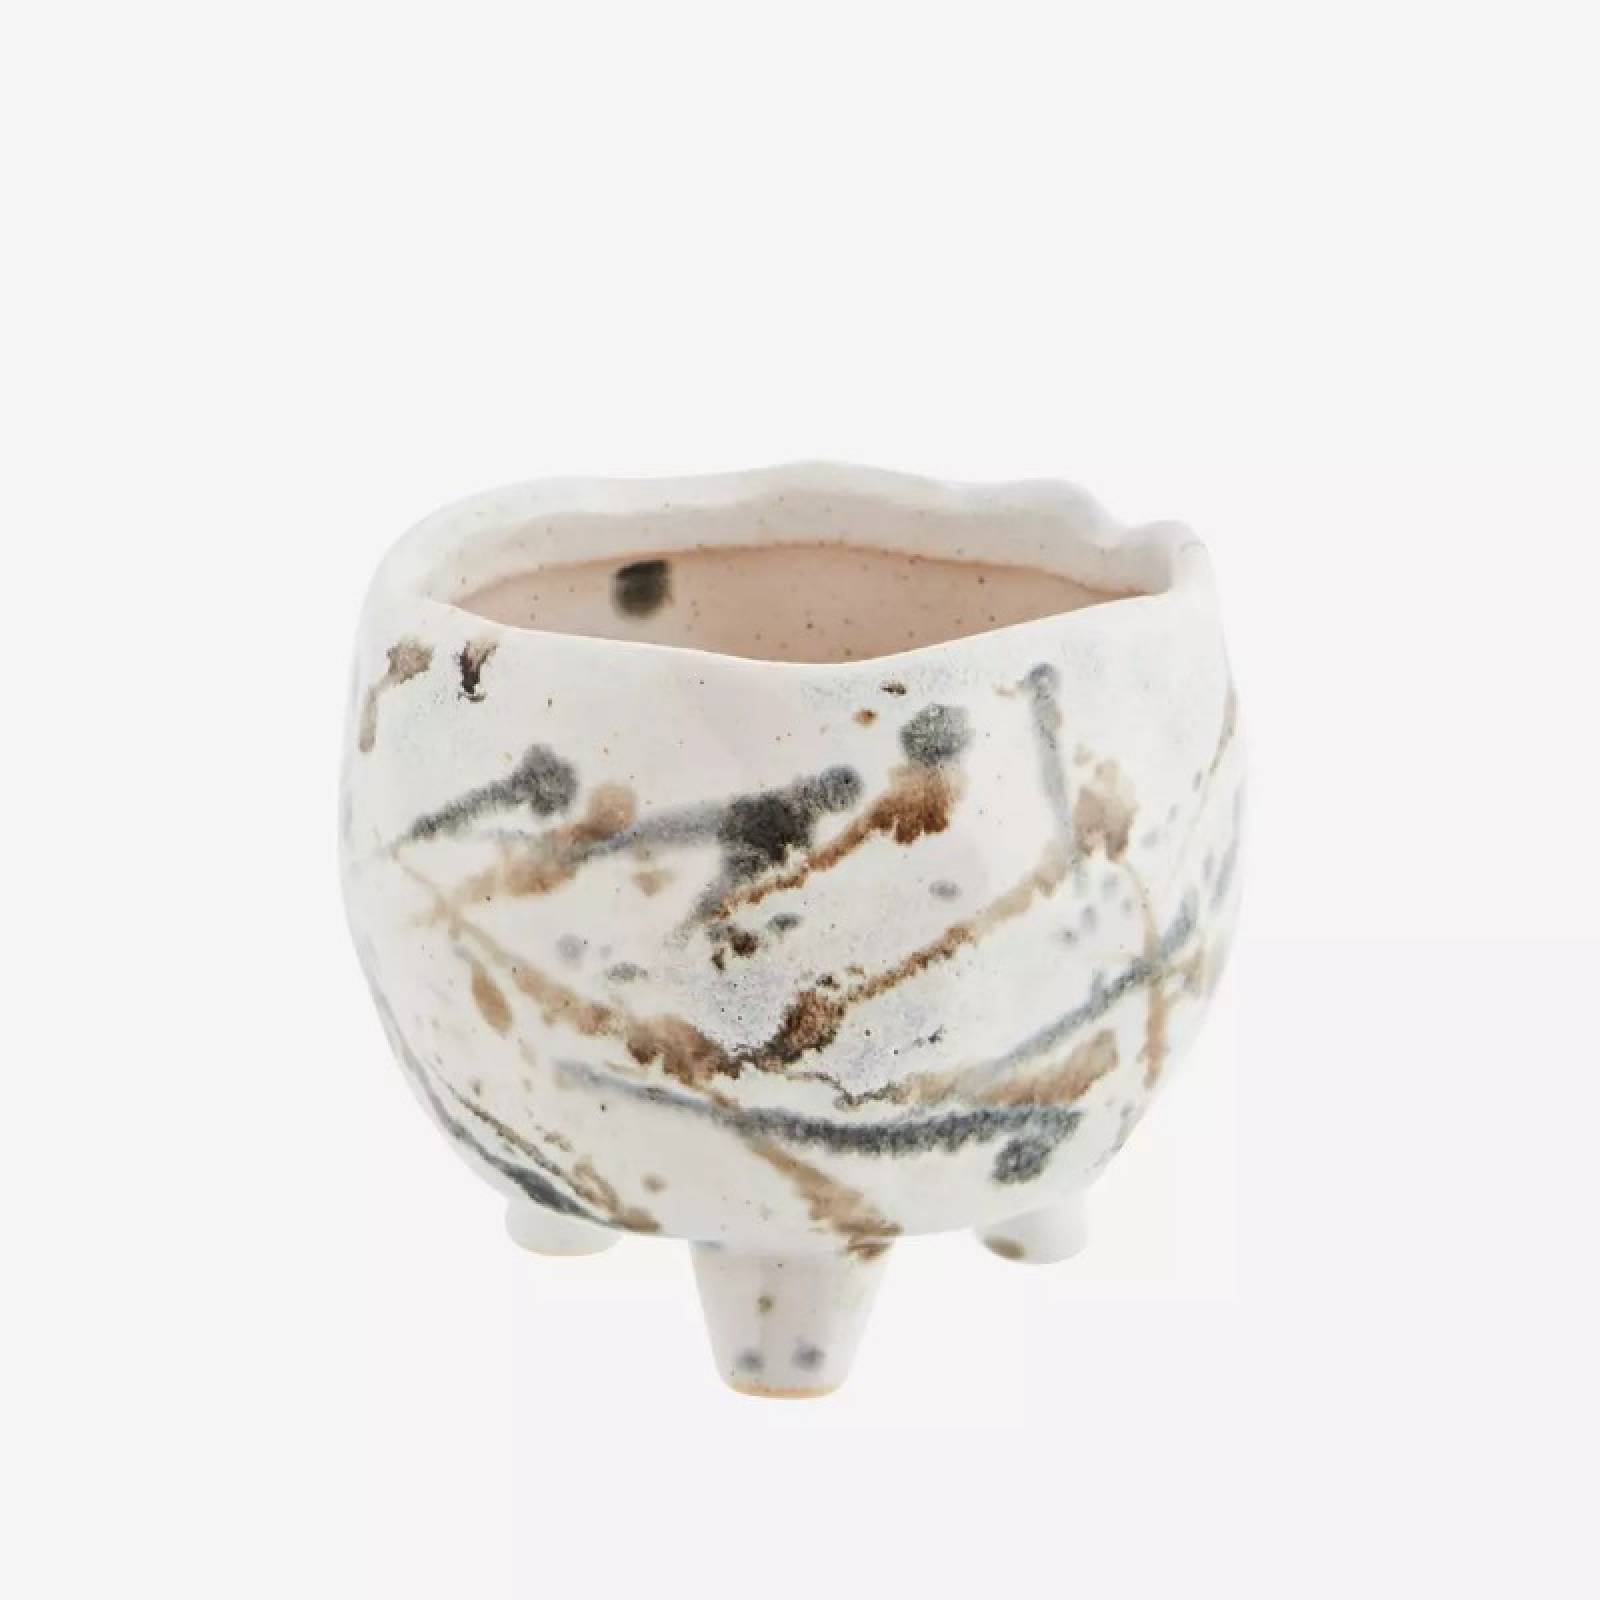 Small Mottled Stoneware Pot In Grey & Taupe On Tripod Legs thumbnails